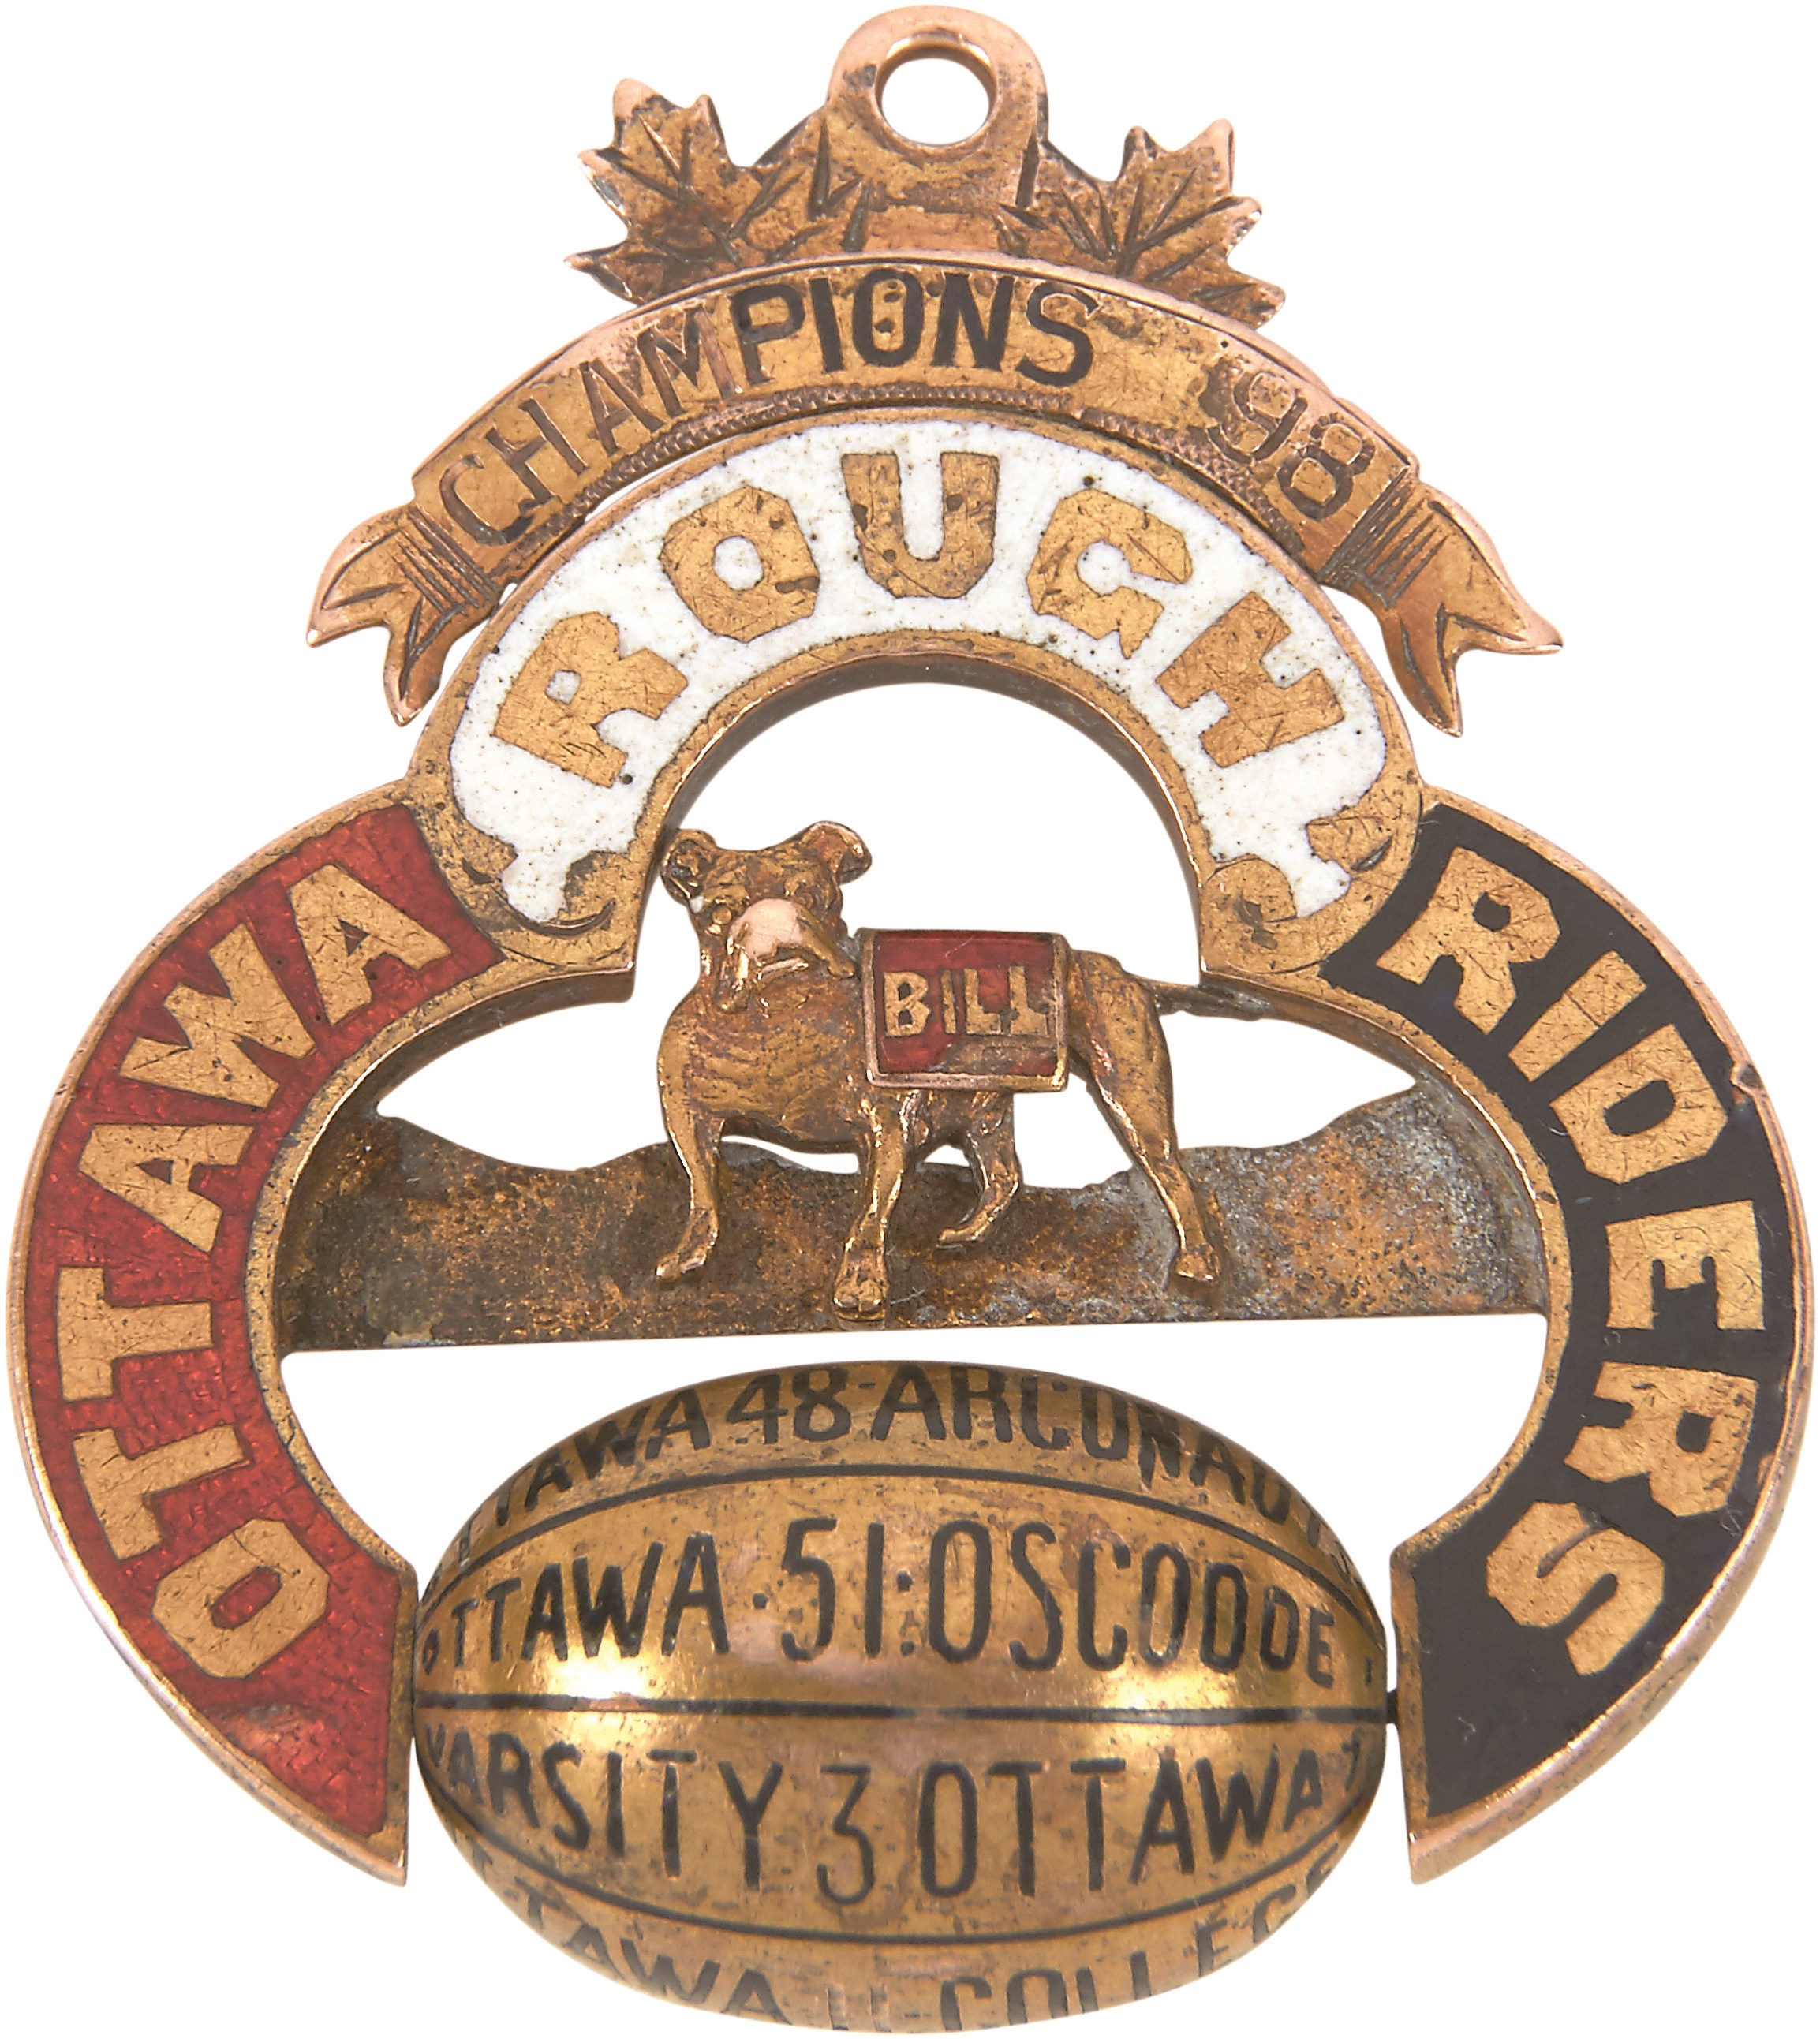 First Ever Ottawa Rough Riders Football Championship Medal (1898)